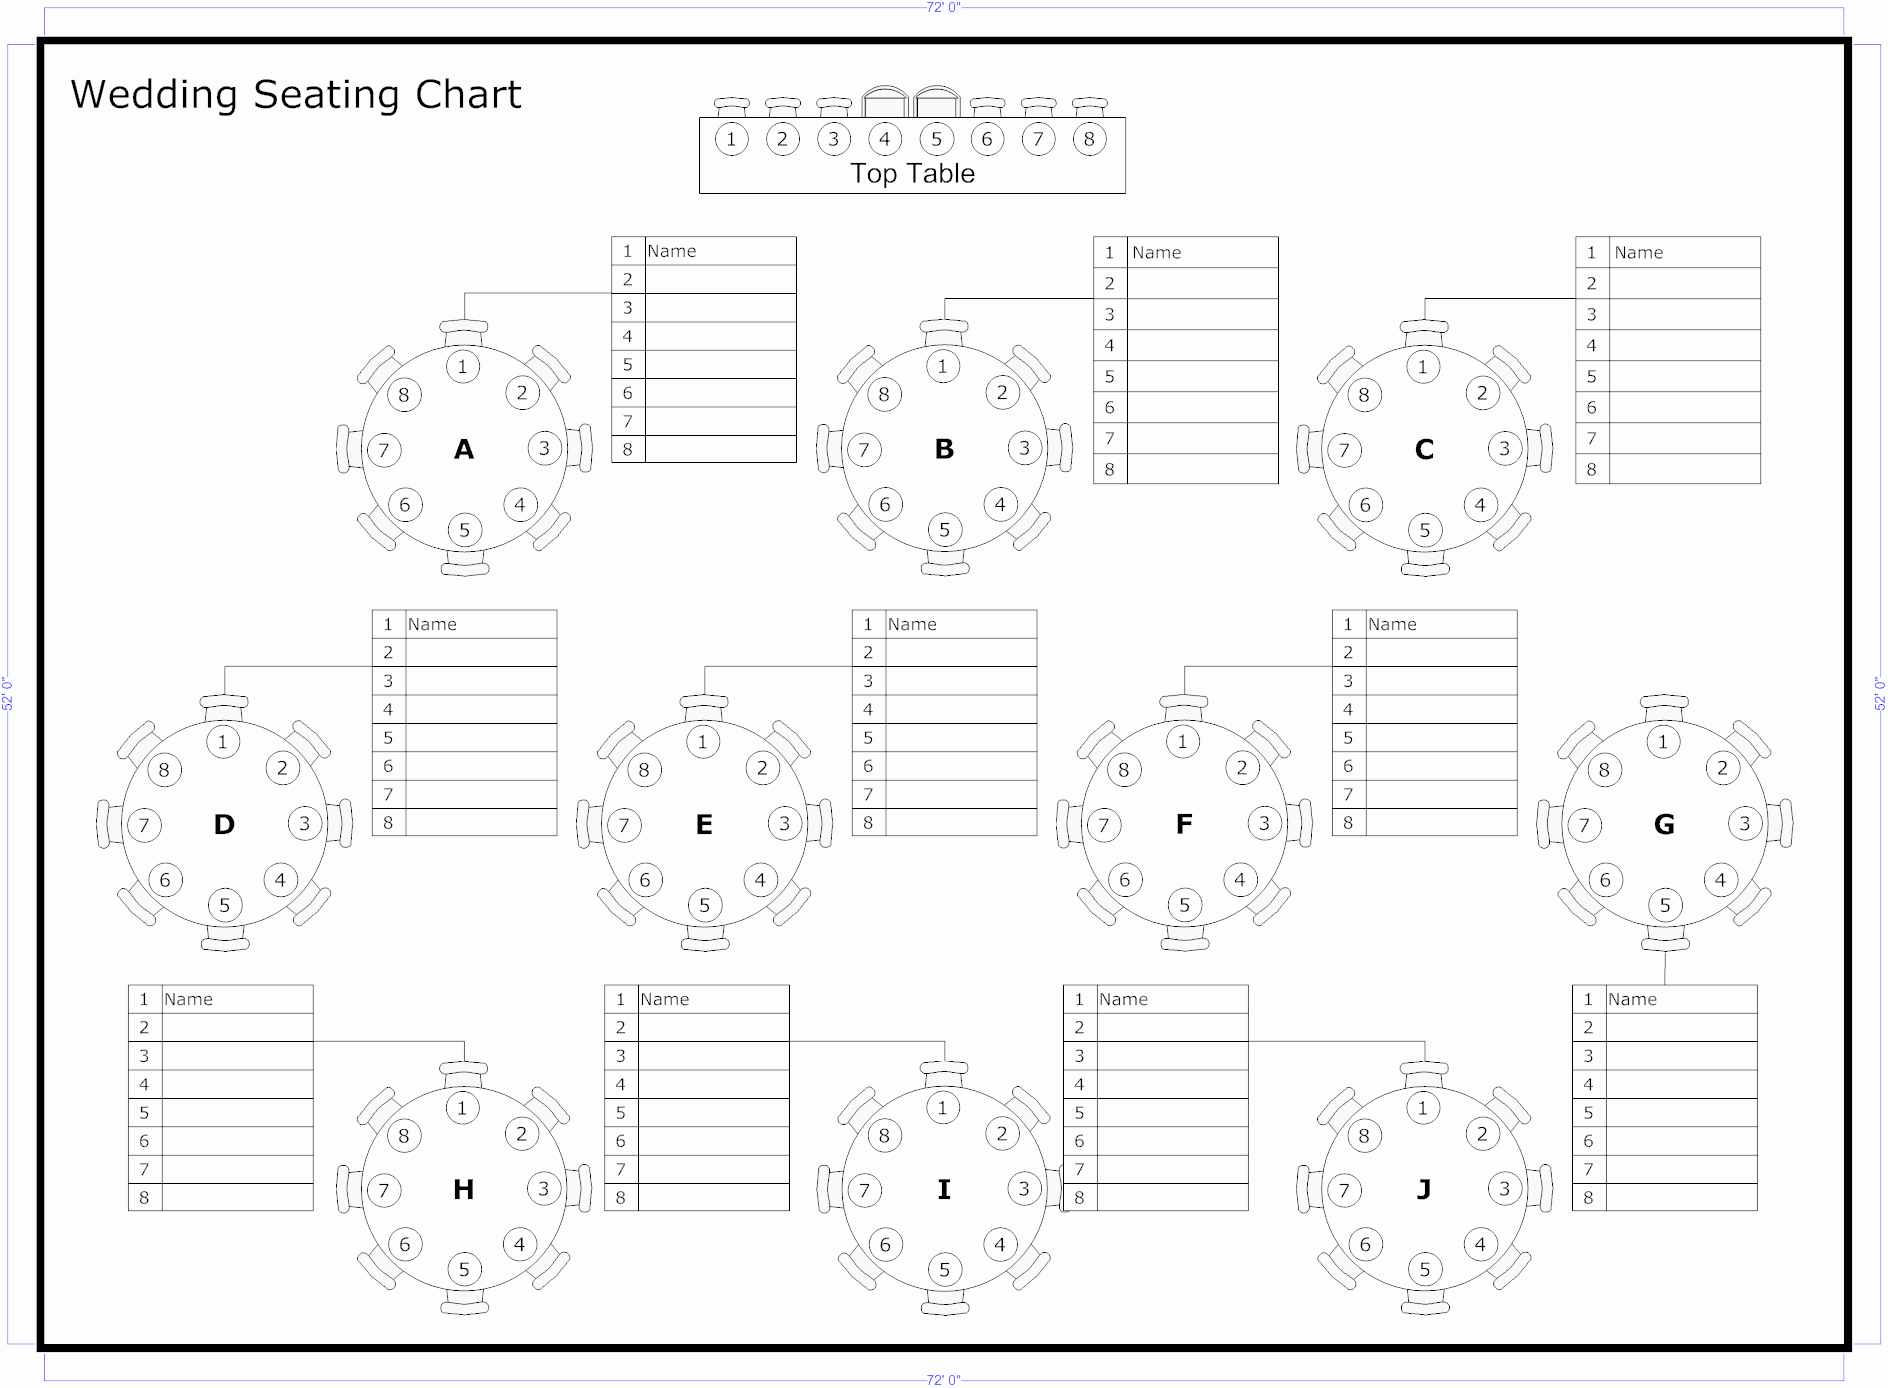 Table Seating Chart Template Beautiful Seating Chart Make A Seating Chart Seating Chart Templates